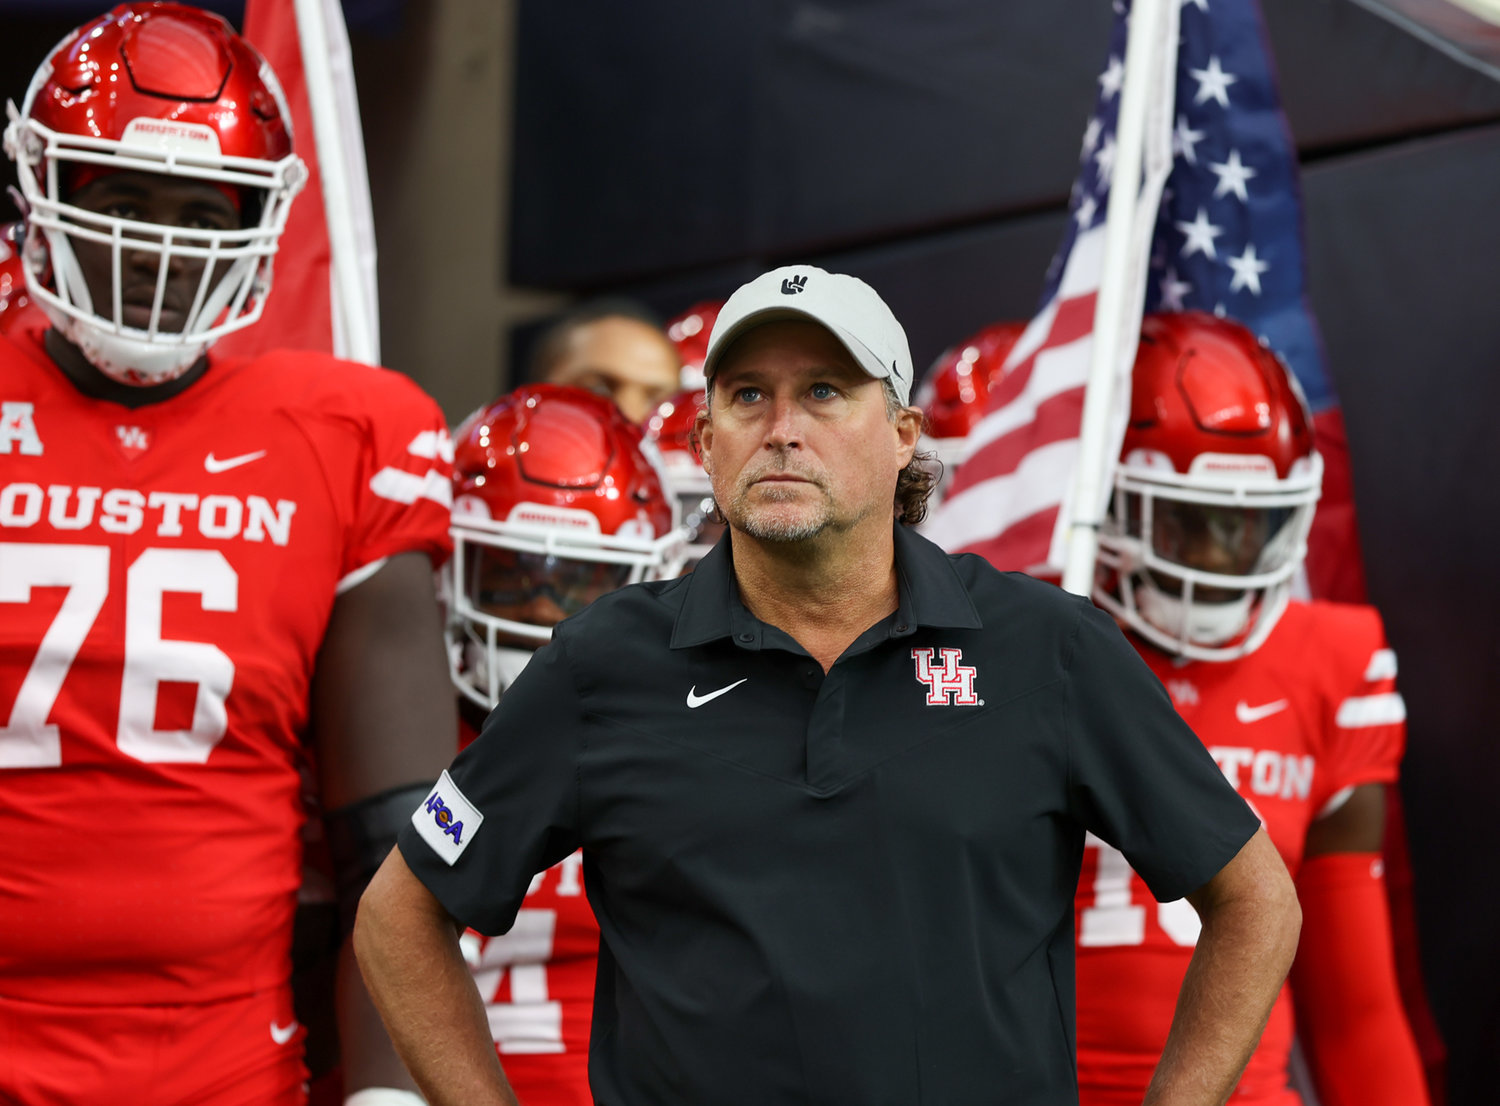 Houston Cougars head coach Dana Holgerson prepares to lead his field onto the team for an NCAA football game between Houston and Texas Tech on September 4, 2021 in Houston, Texas.